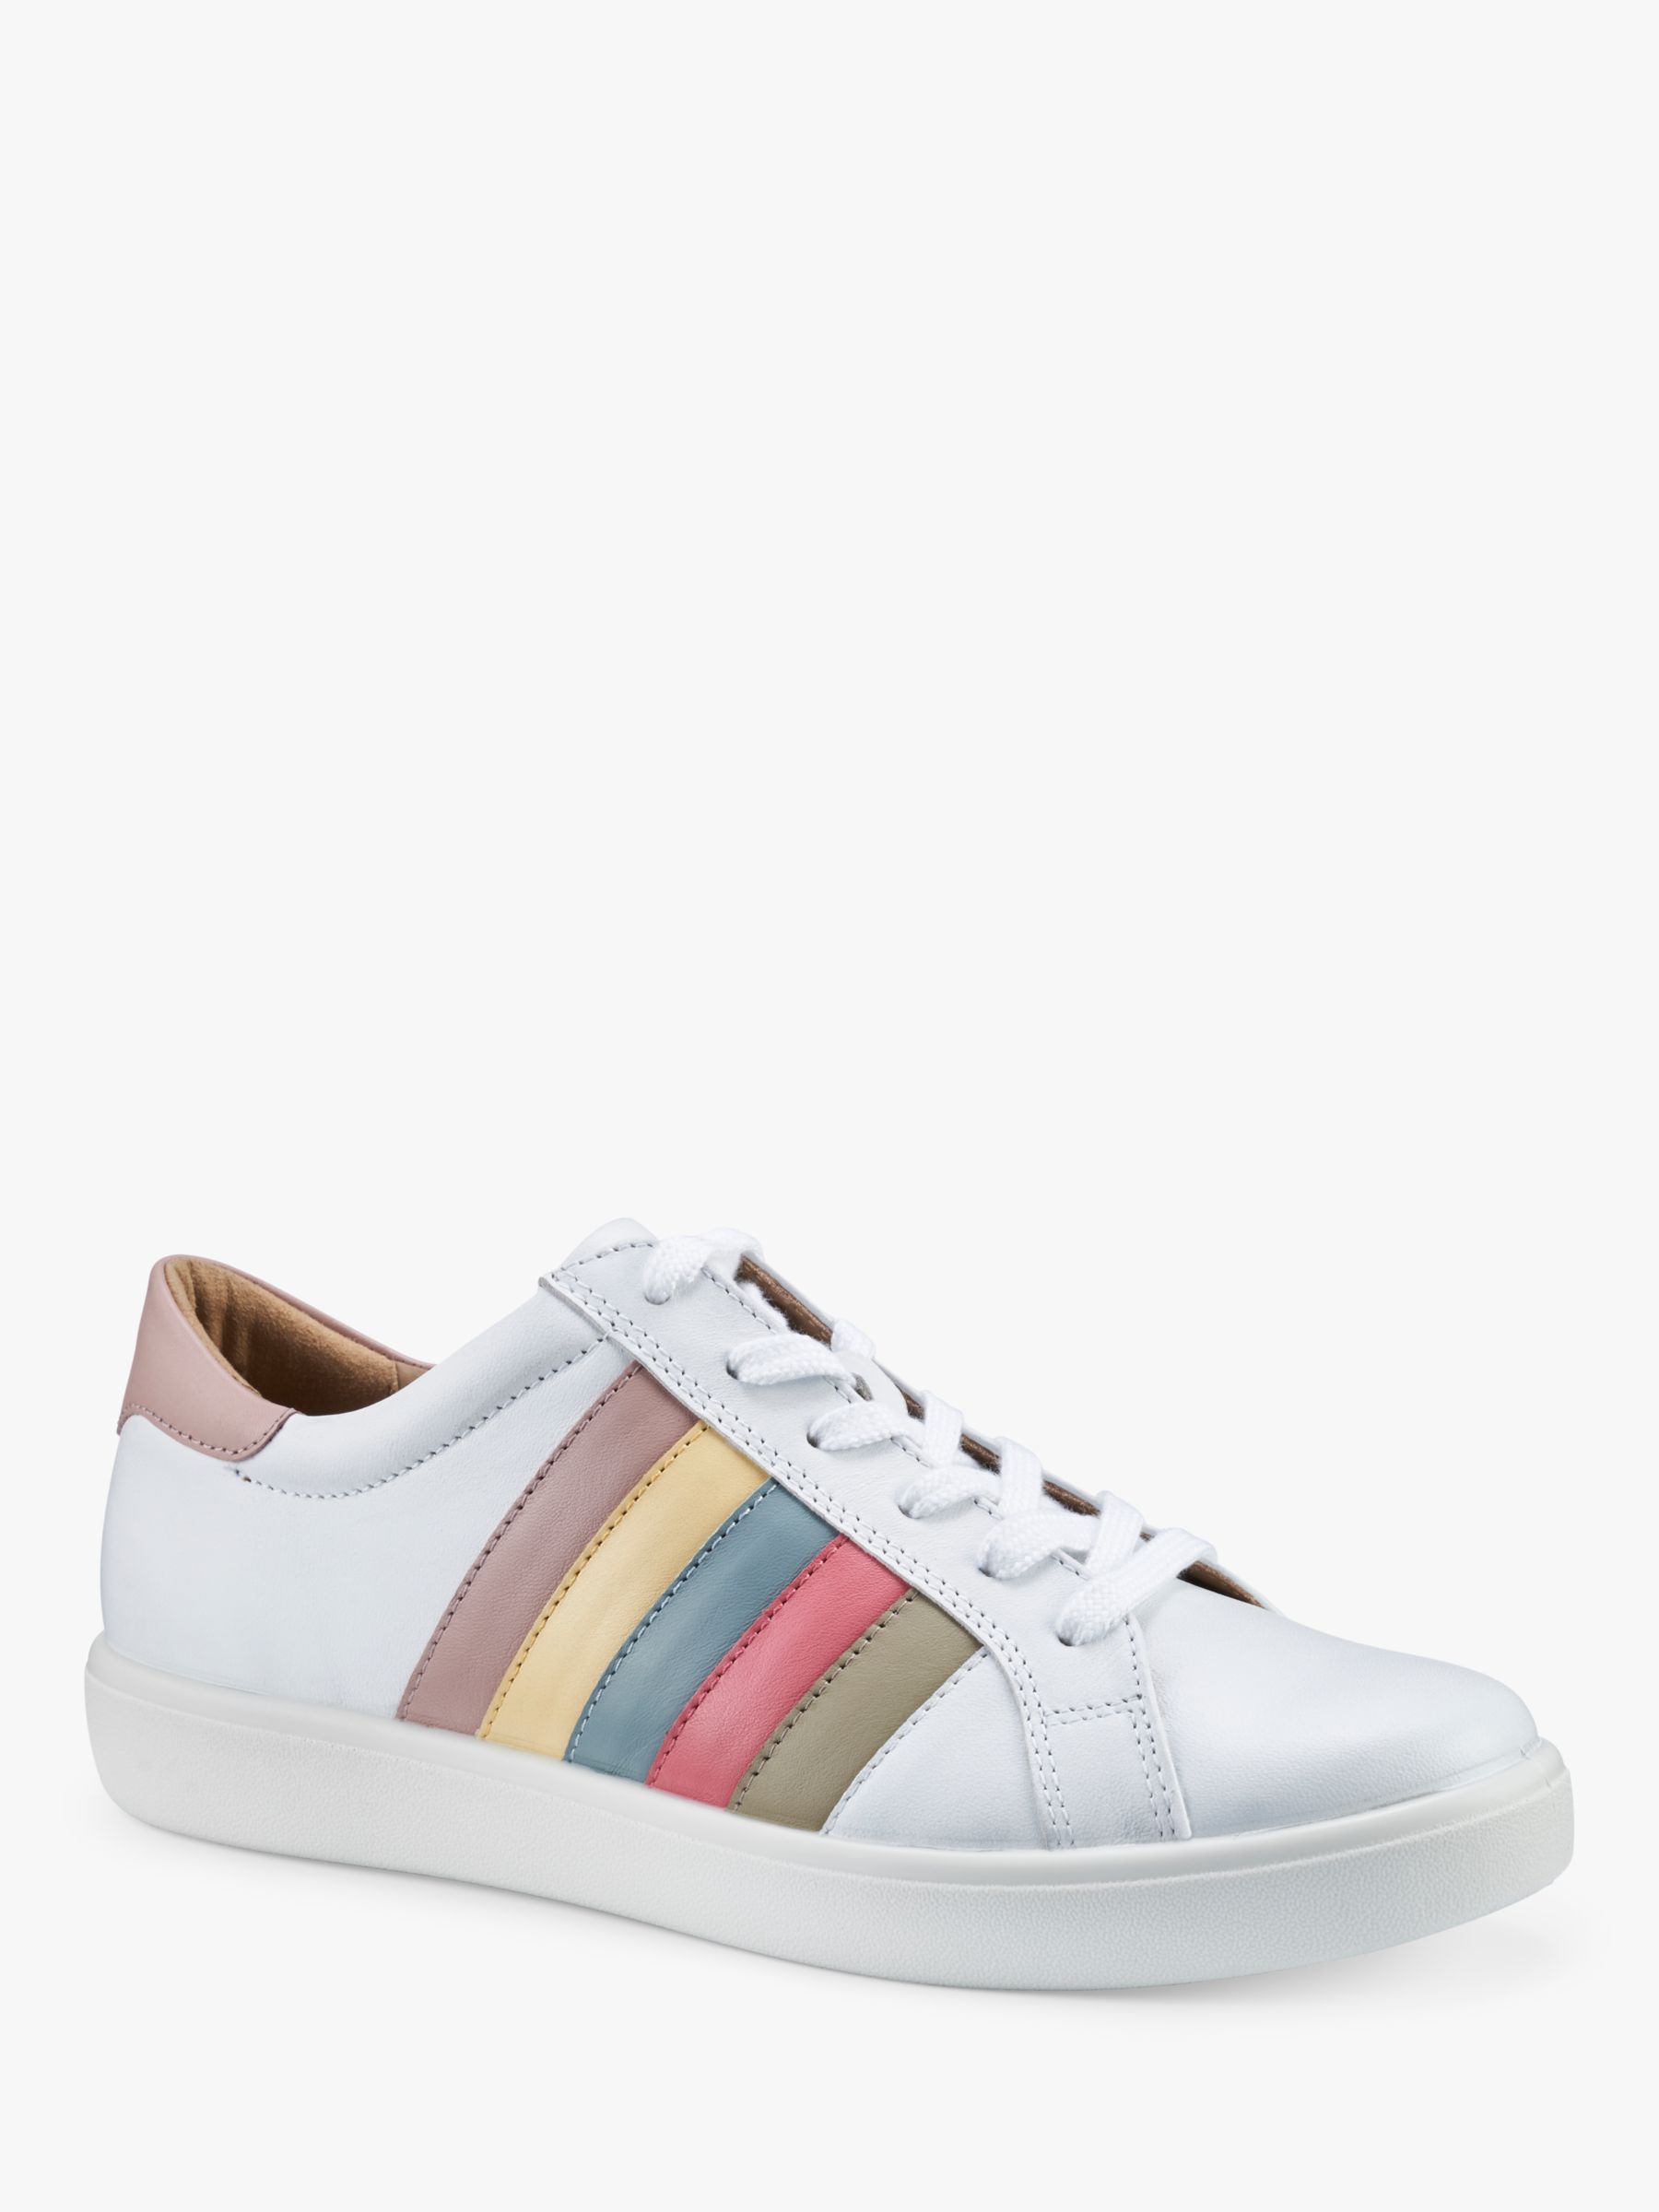 Buy Hotter Switch Wide Fit Leather Trainers Online at johnlewis.com